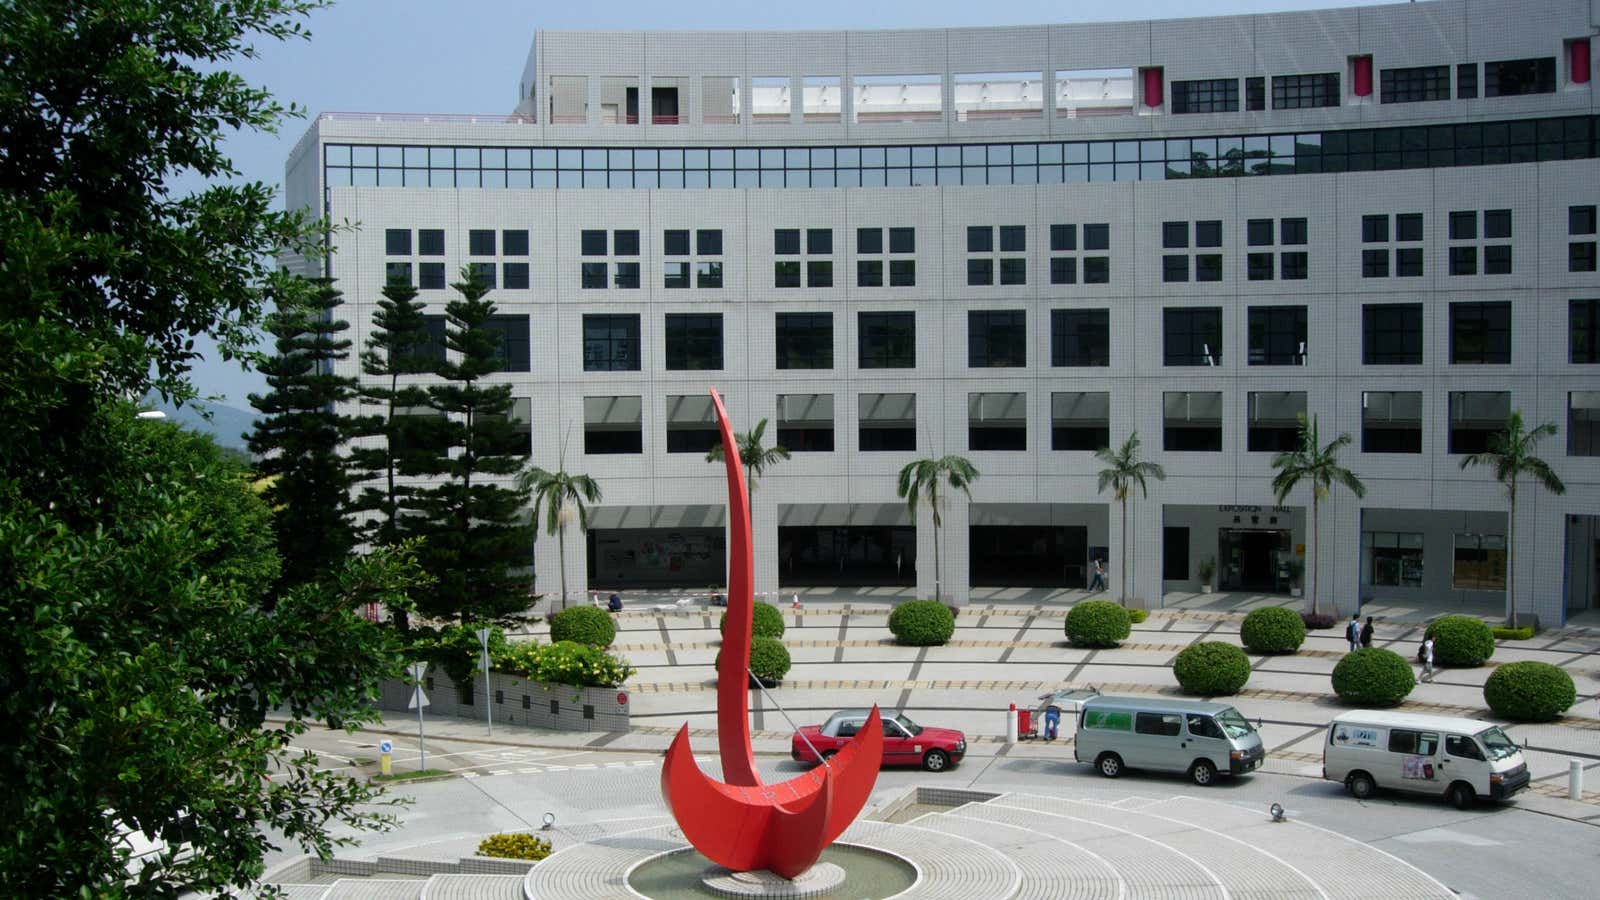 The Hong Kong University of Science and Technology held the number one spot in the QS Asian Universities 2013 rankings.